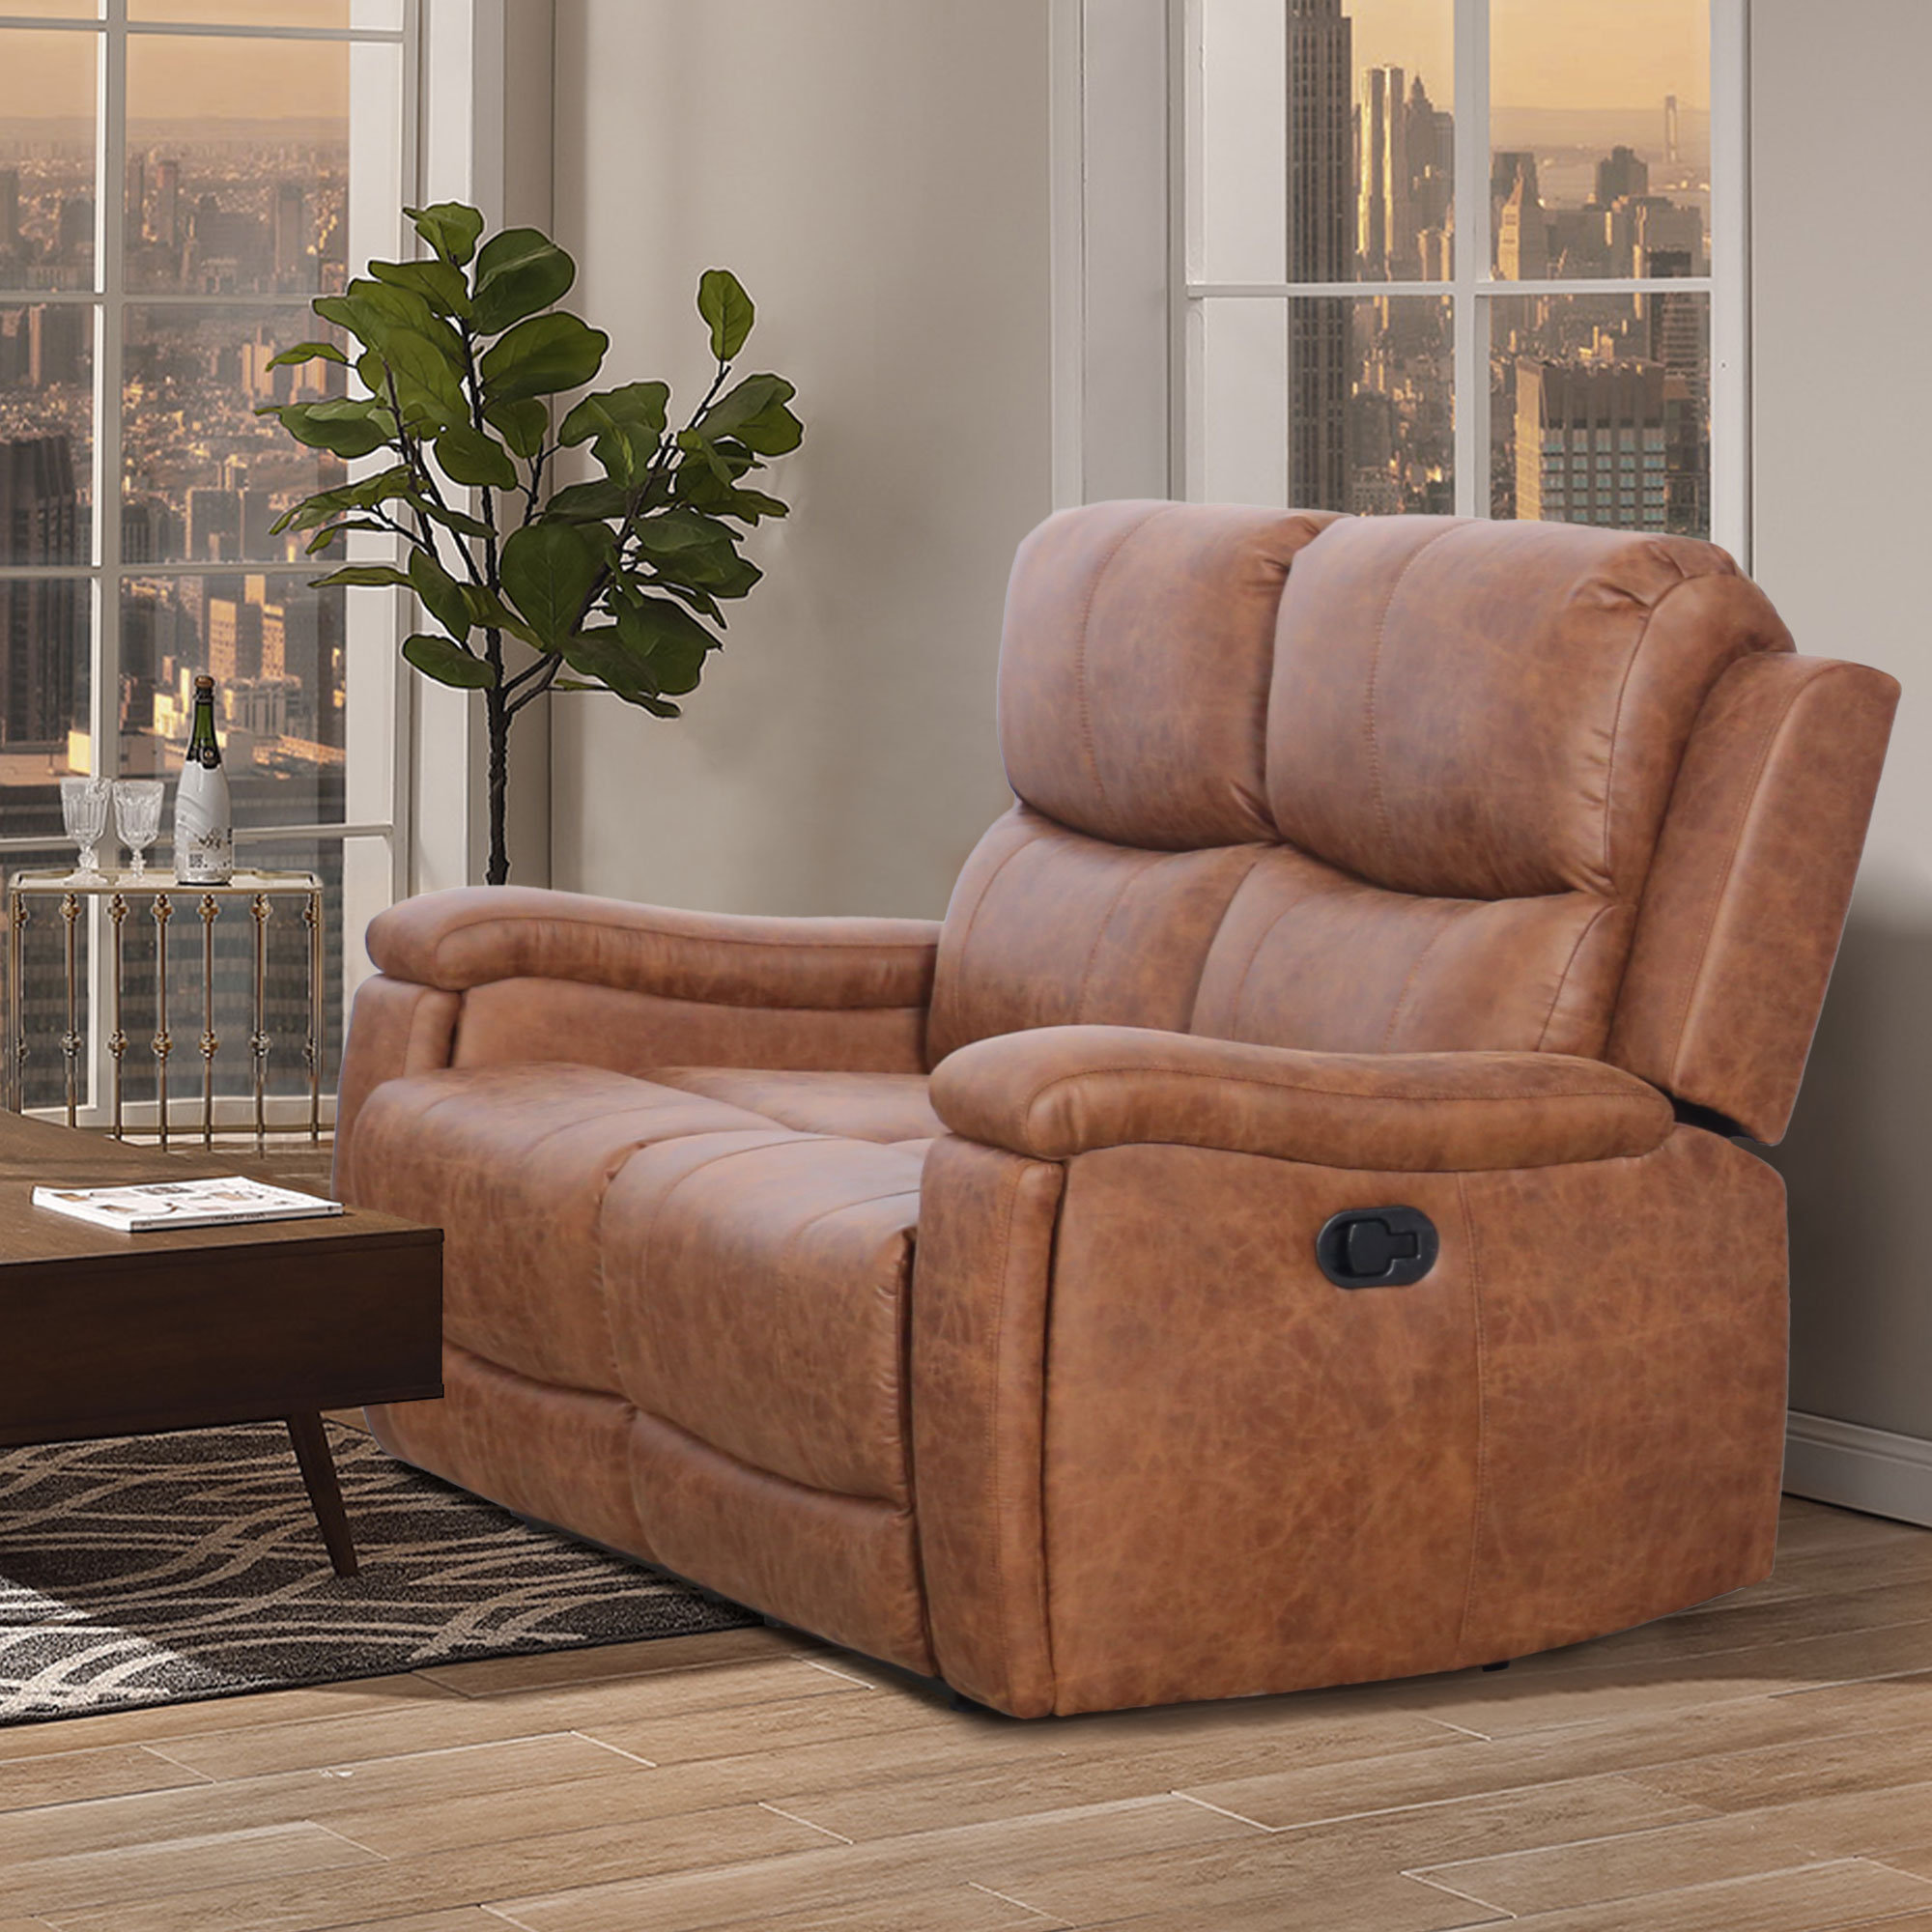 SAM'S CLUB Furniture Leather Recliner Home Appliances Shop With Me